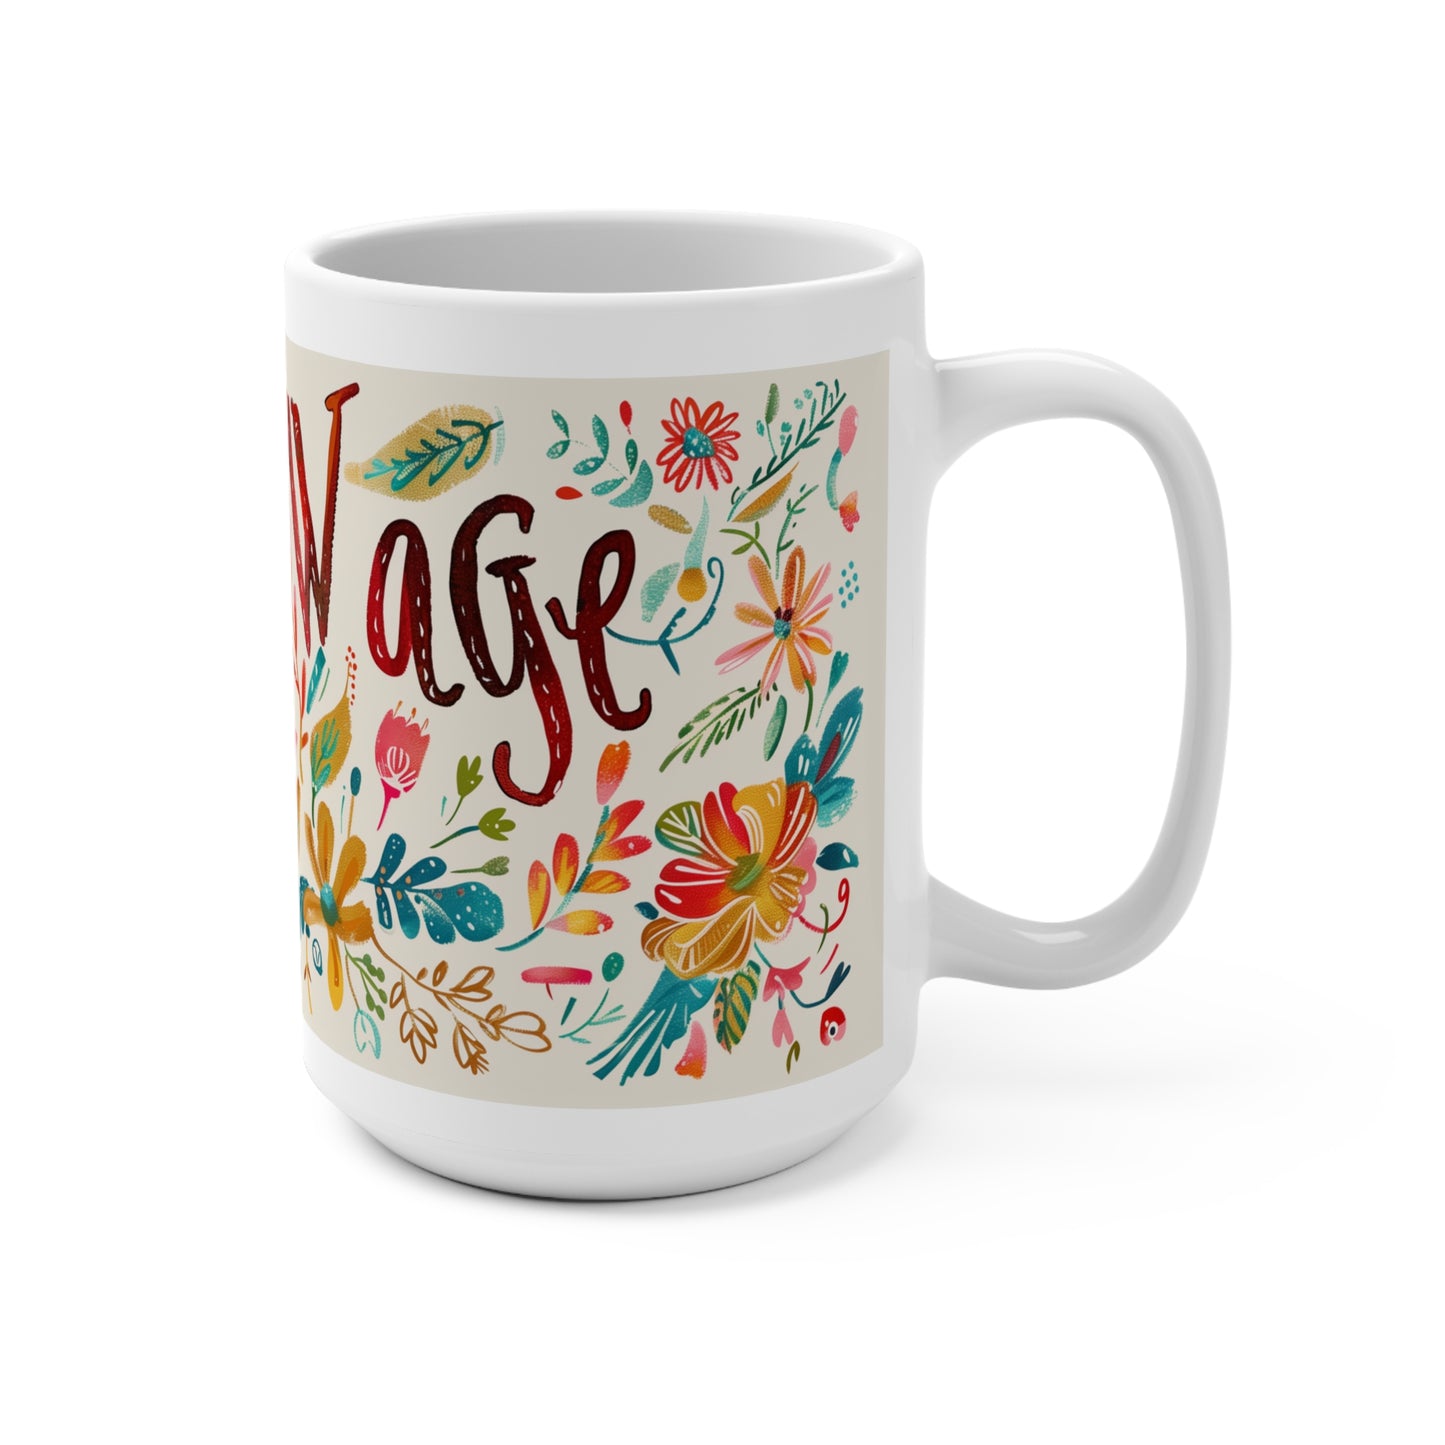 Living Wage Protest Coffee Mug (15oz) Political Mug 40 hours Should Pay the Bills! Labor Unite Activism Inspired by Cath Kidston